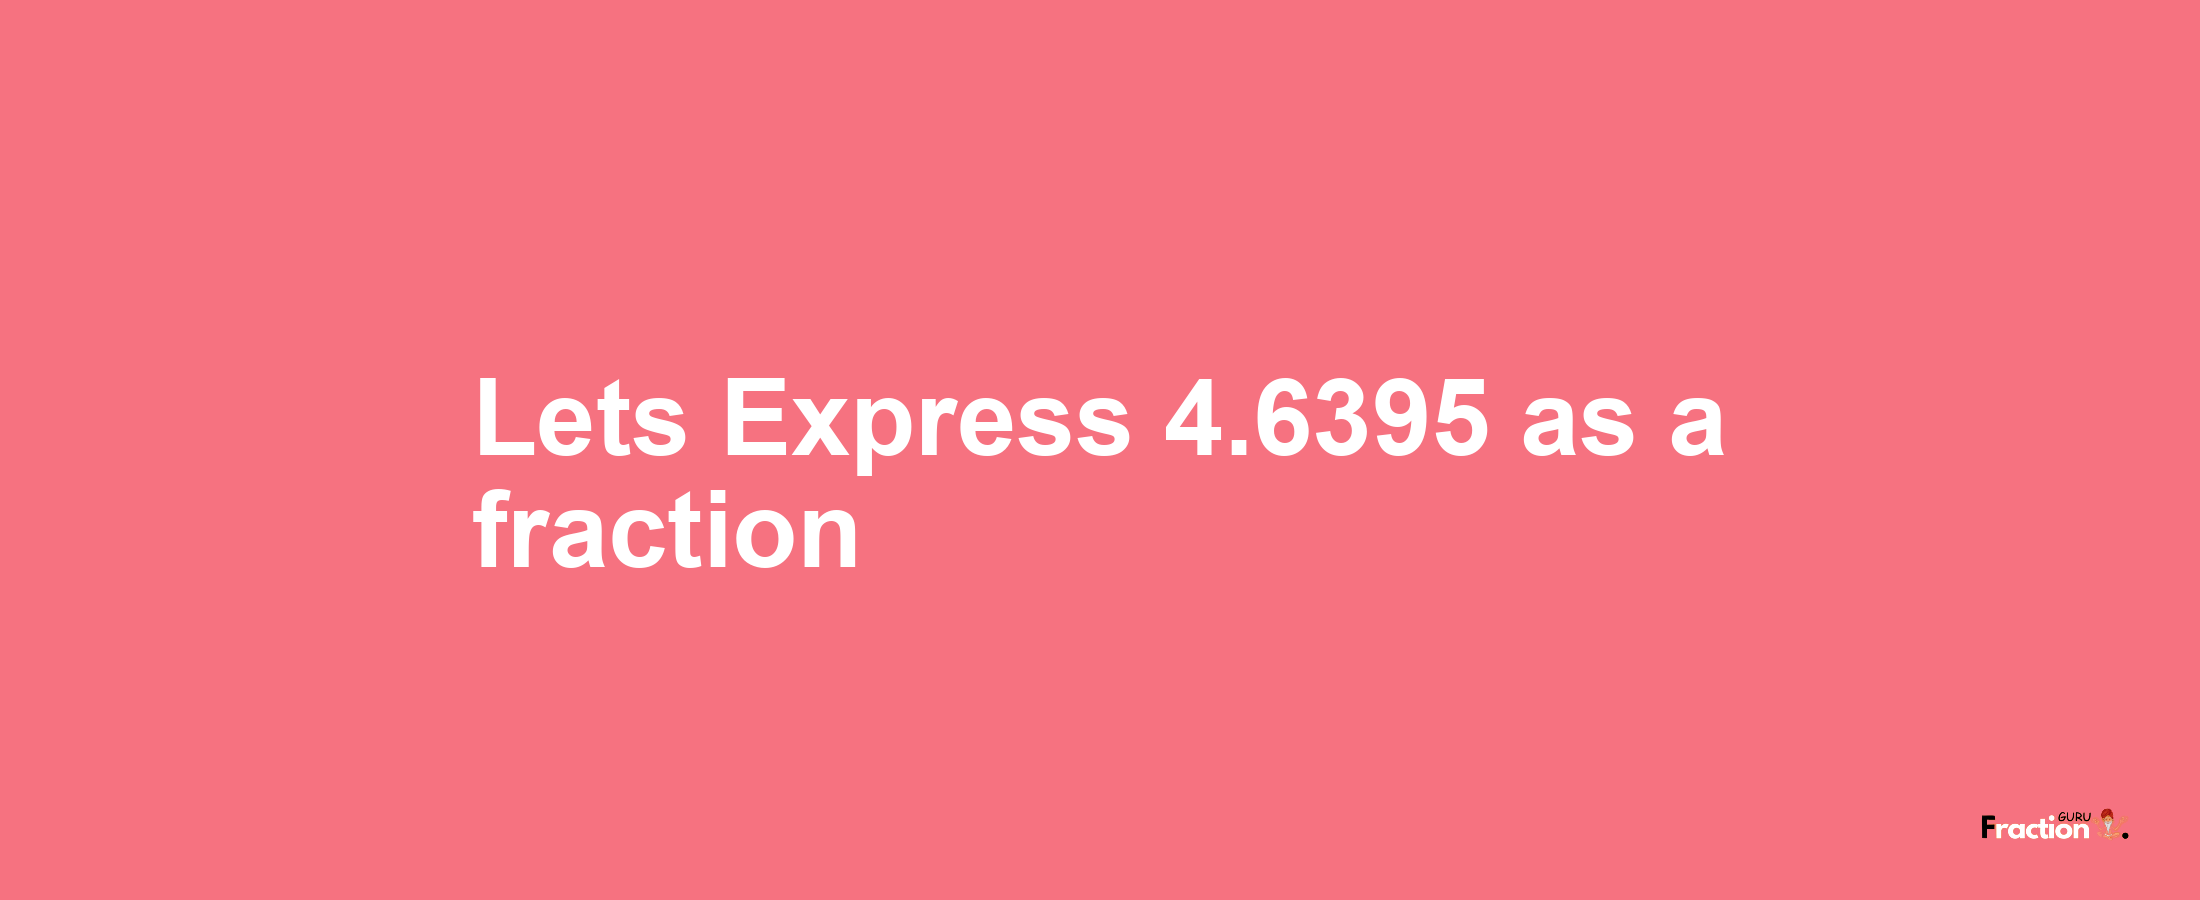 Lets Express 4.6395 as afraction